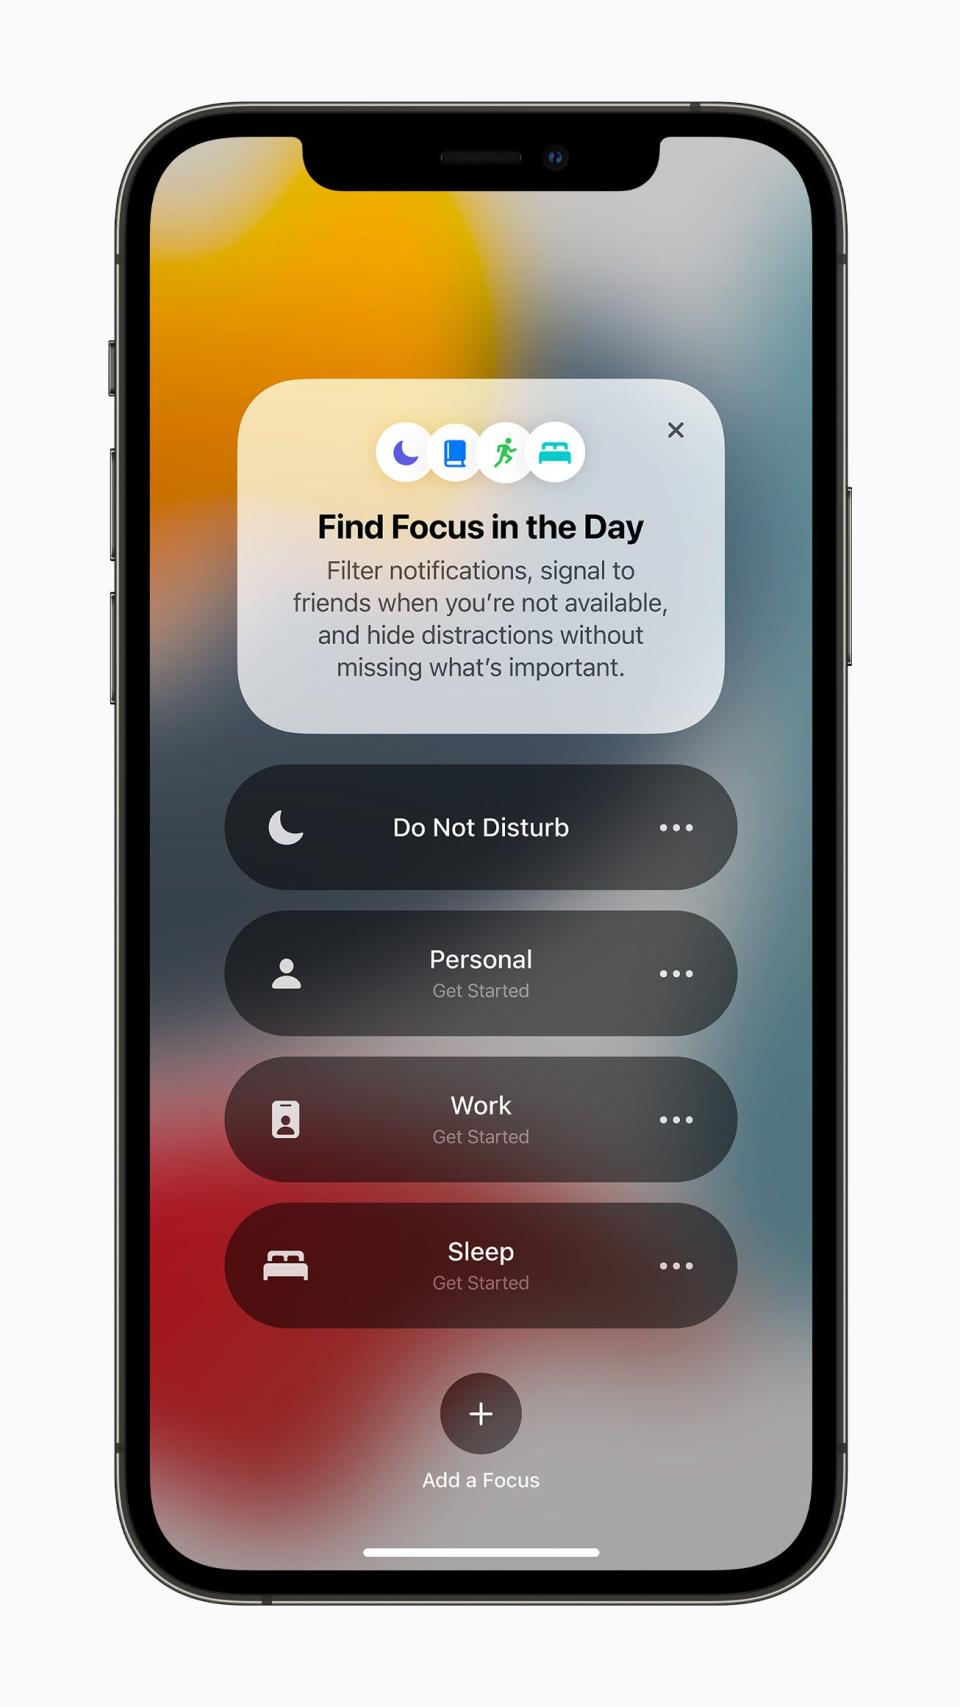 A new feature coming to iOS 15 is Focus, which filters notifications and apps based on what a user wants to focus on to help you reduce distractions.